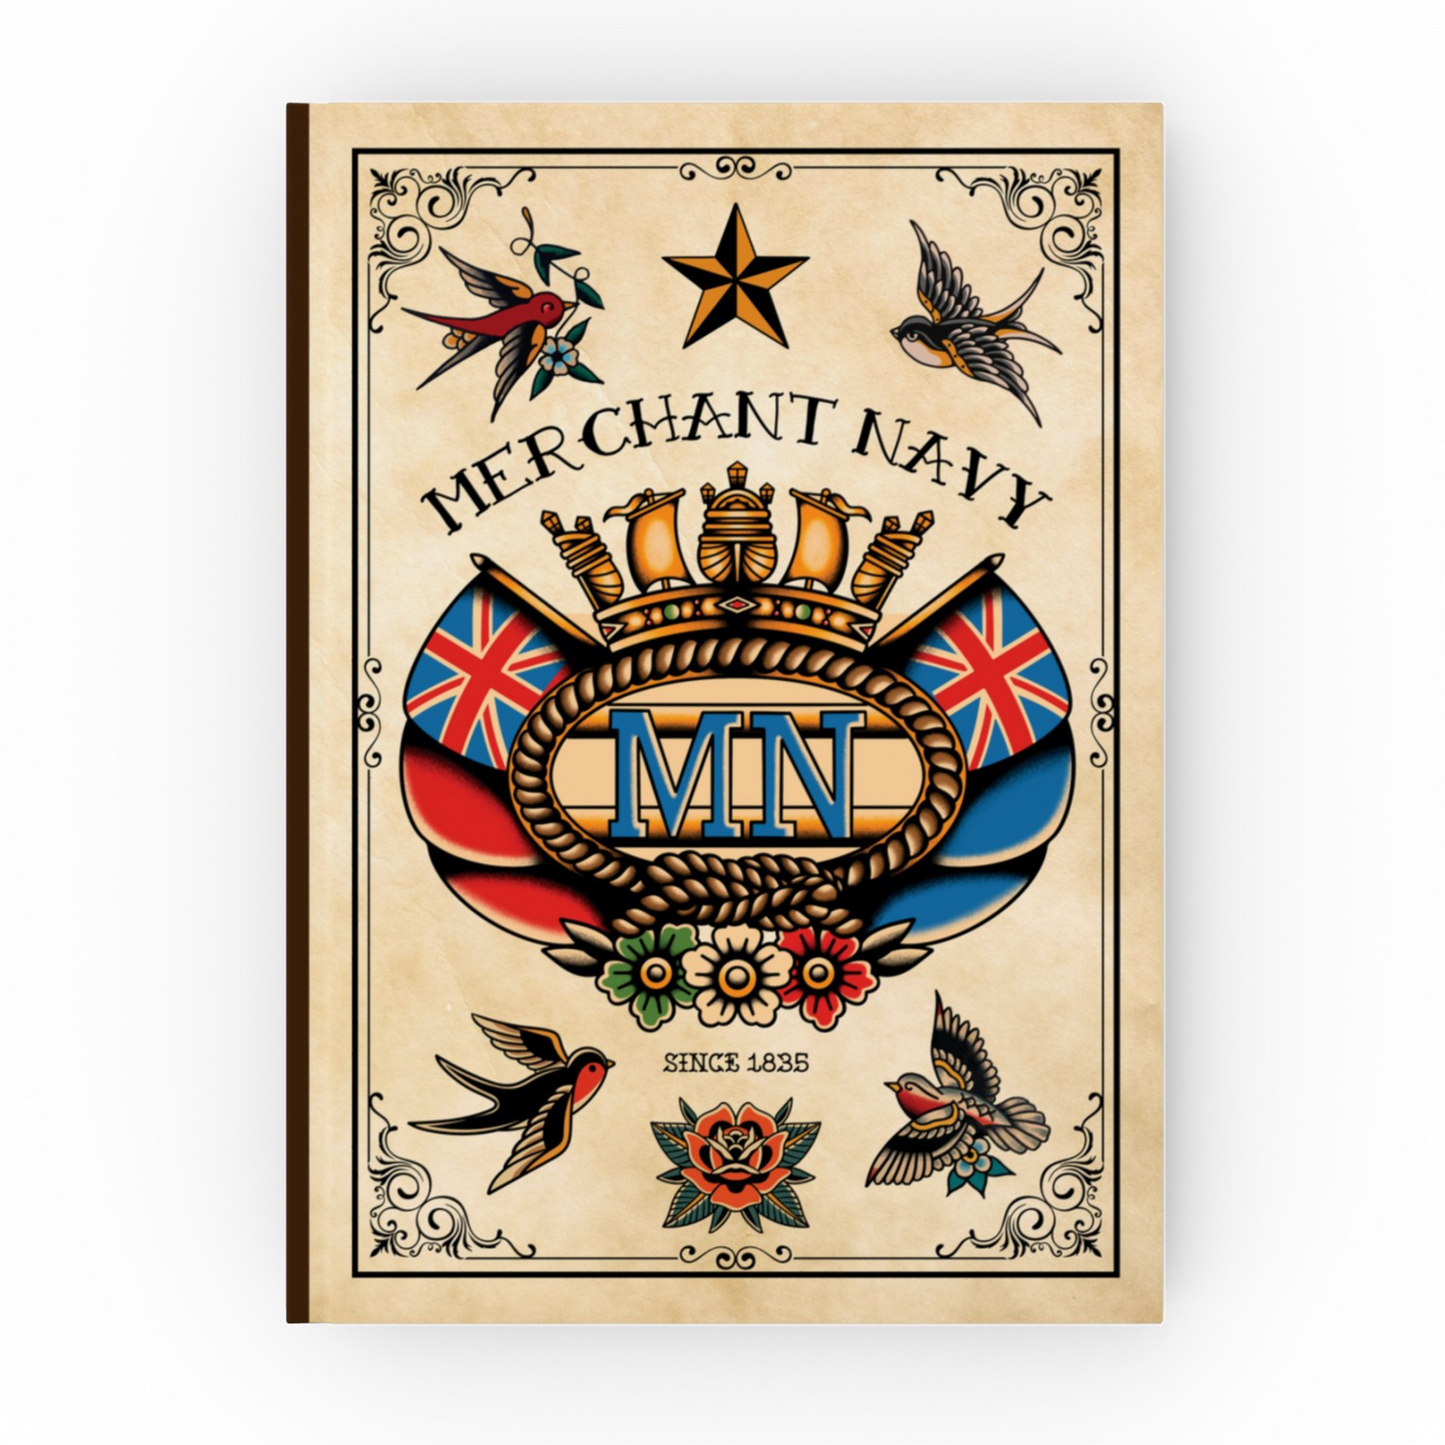 Hardback Notebook (Vintage style sailor tattoo inspired Merchant Navy badge and swallows)